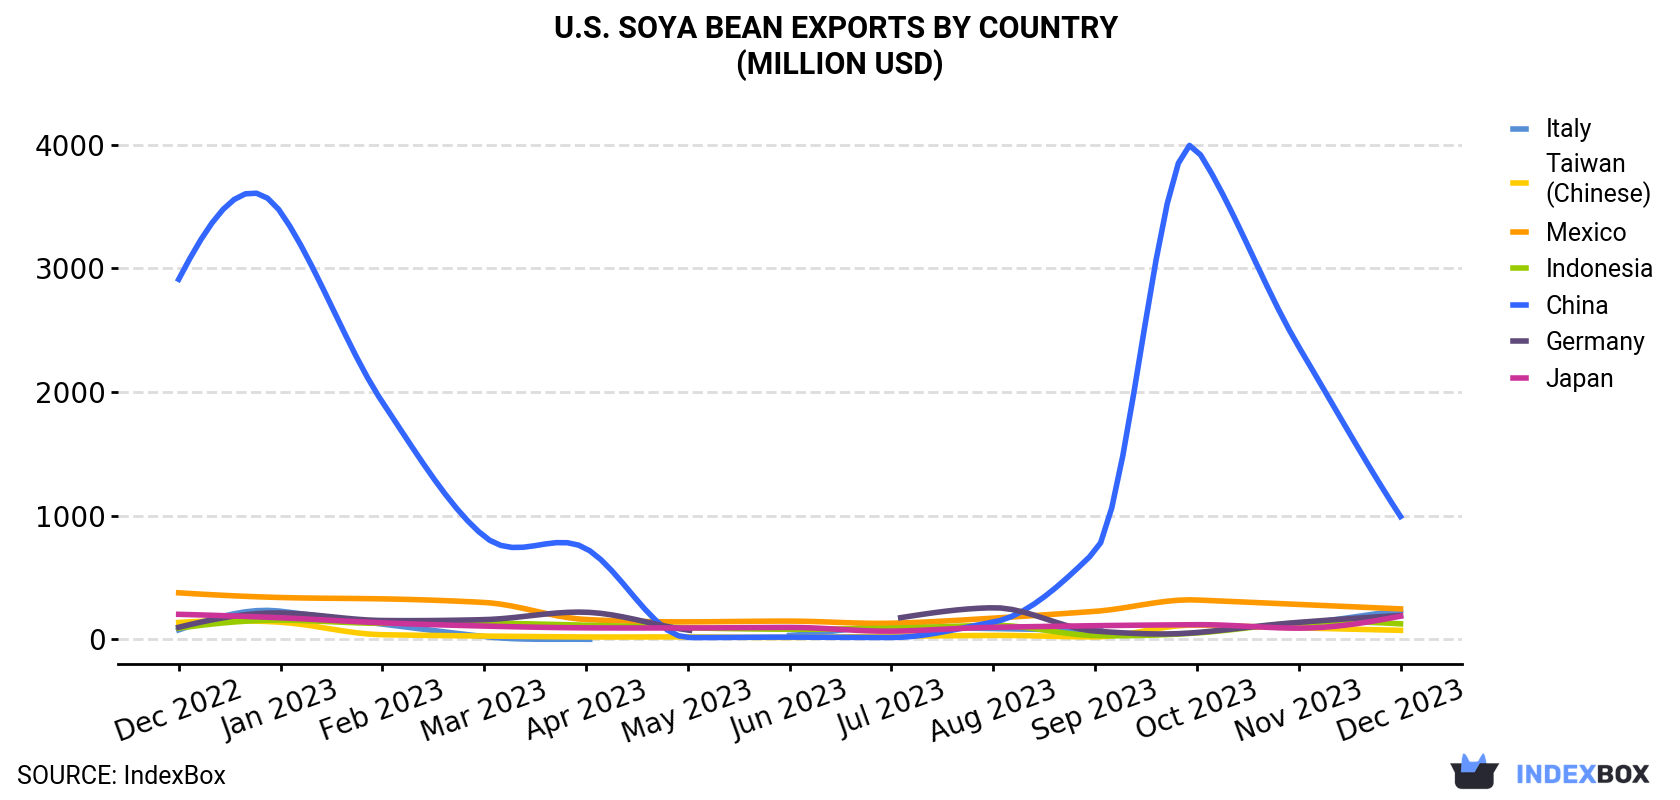 U.S. Soya Bean Exports By Country (Million USD)